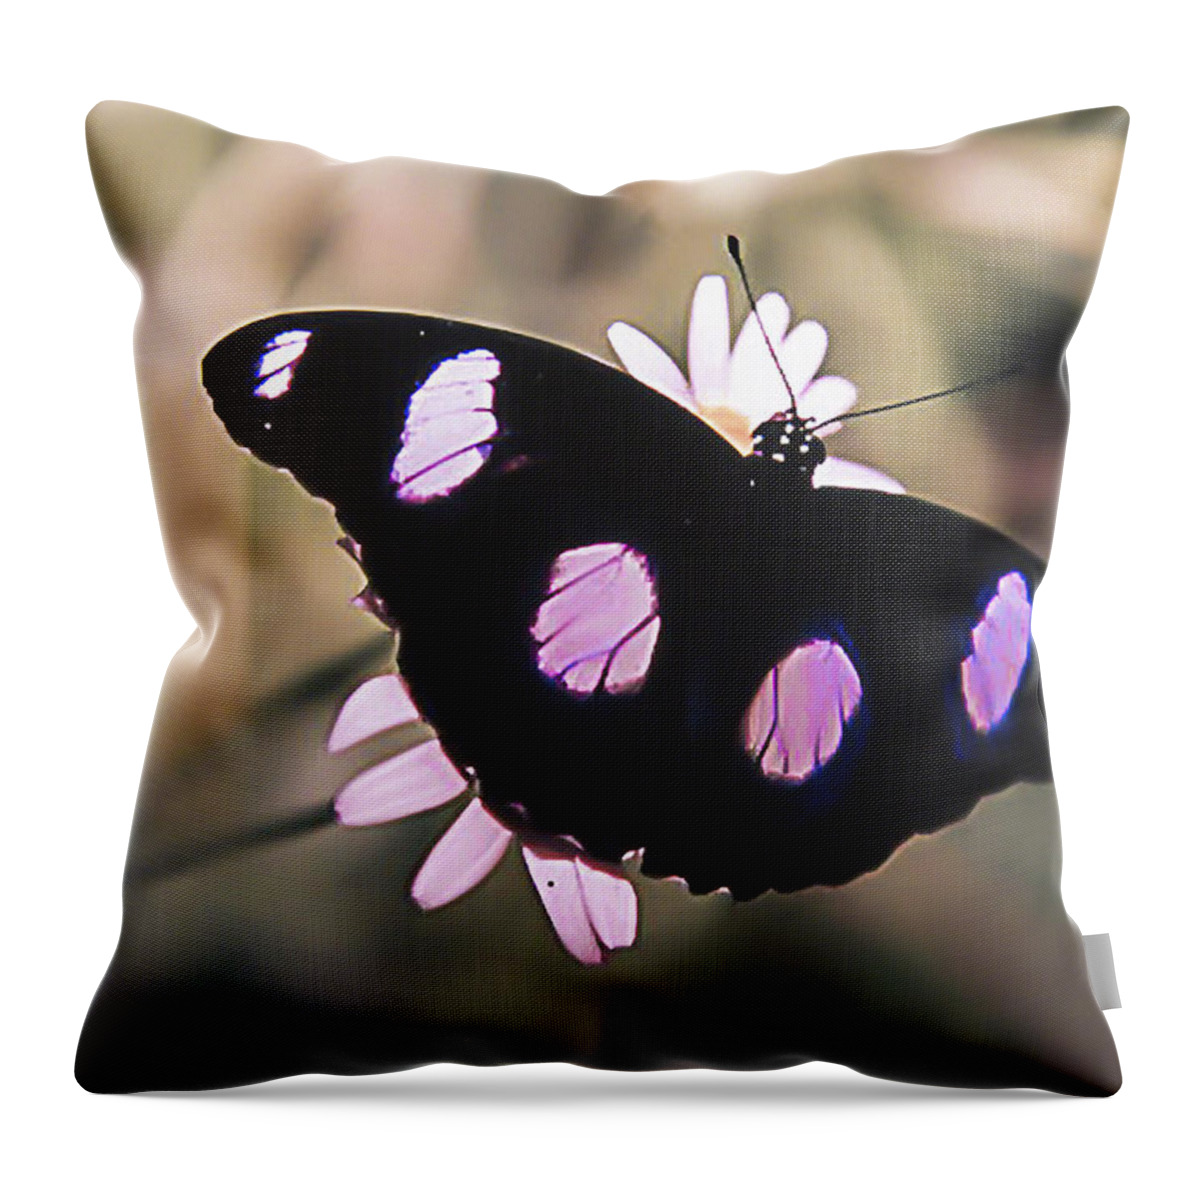 Butterflies Throw Pillow featuring the photograph Spotted by Patrick Kain